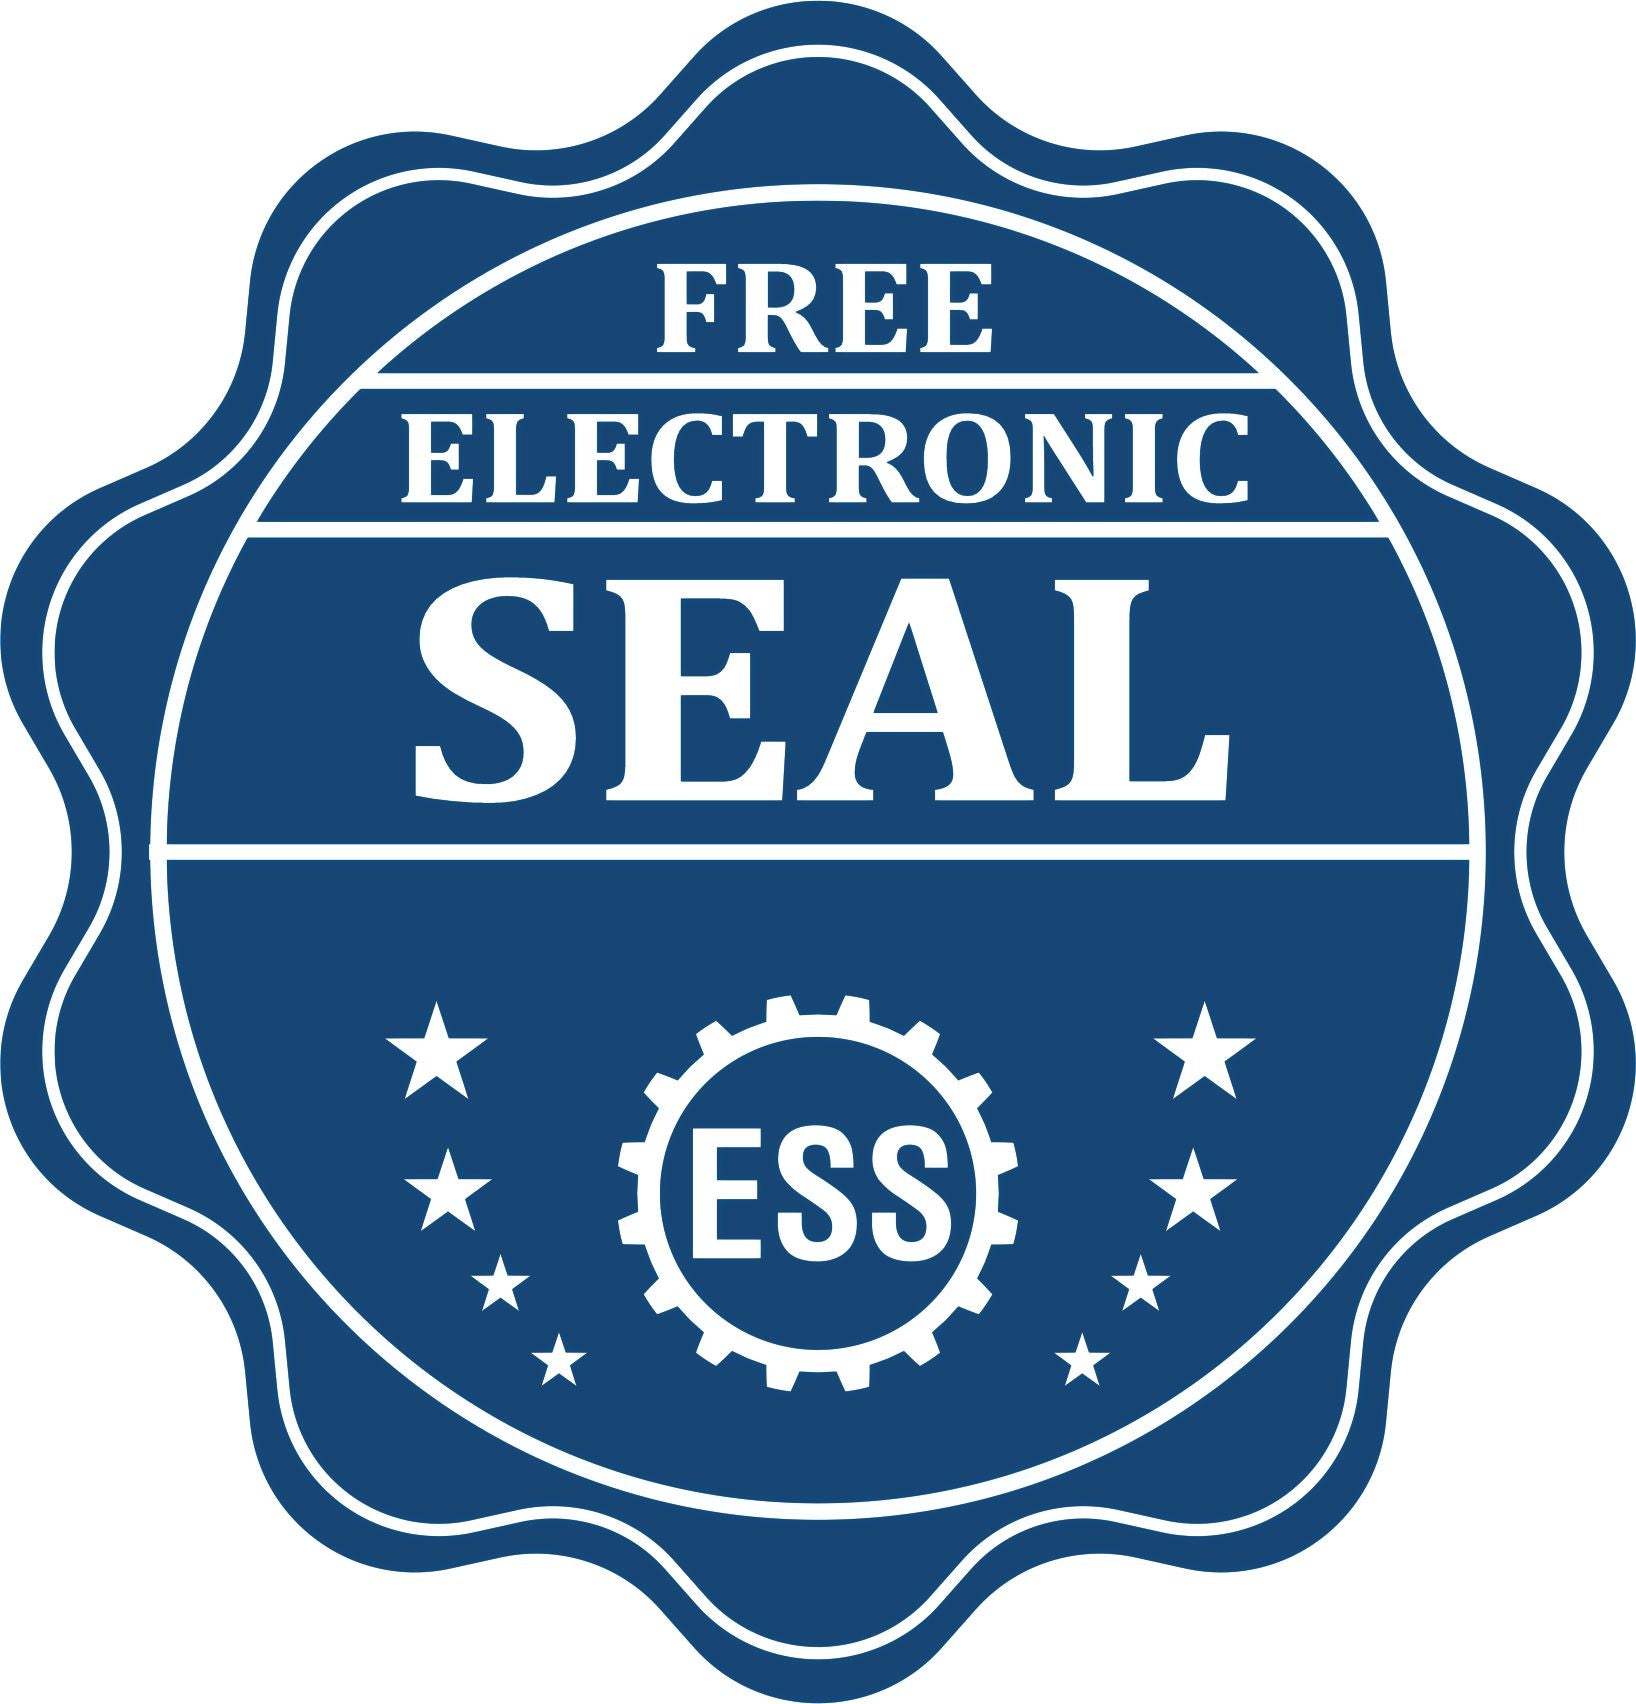 A badge showing a free electronic seal for the Slim Pre-Inked Kansas Landscape Architect Seal Stamp with stars and the ESS gear on the emblem.